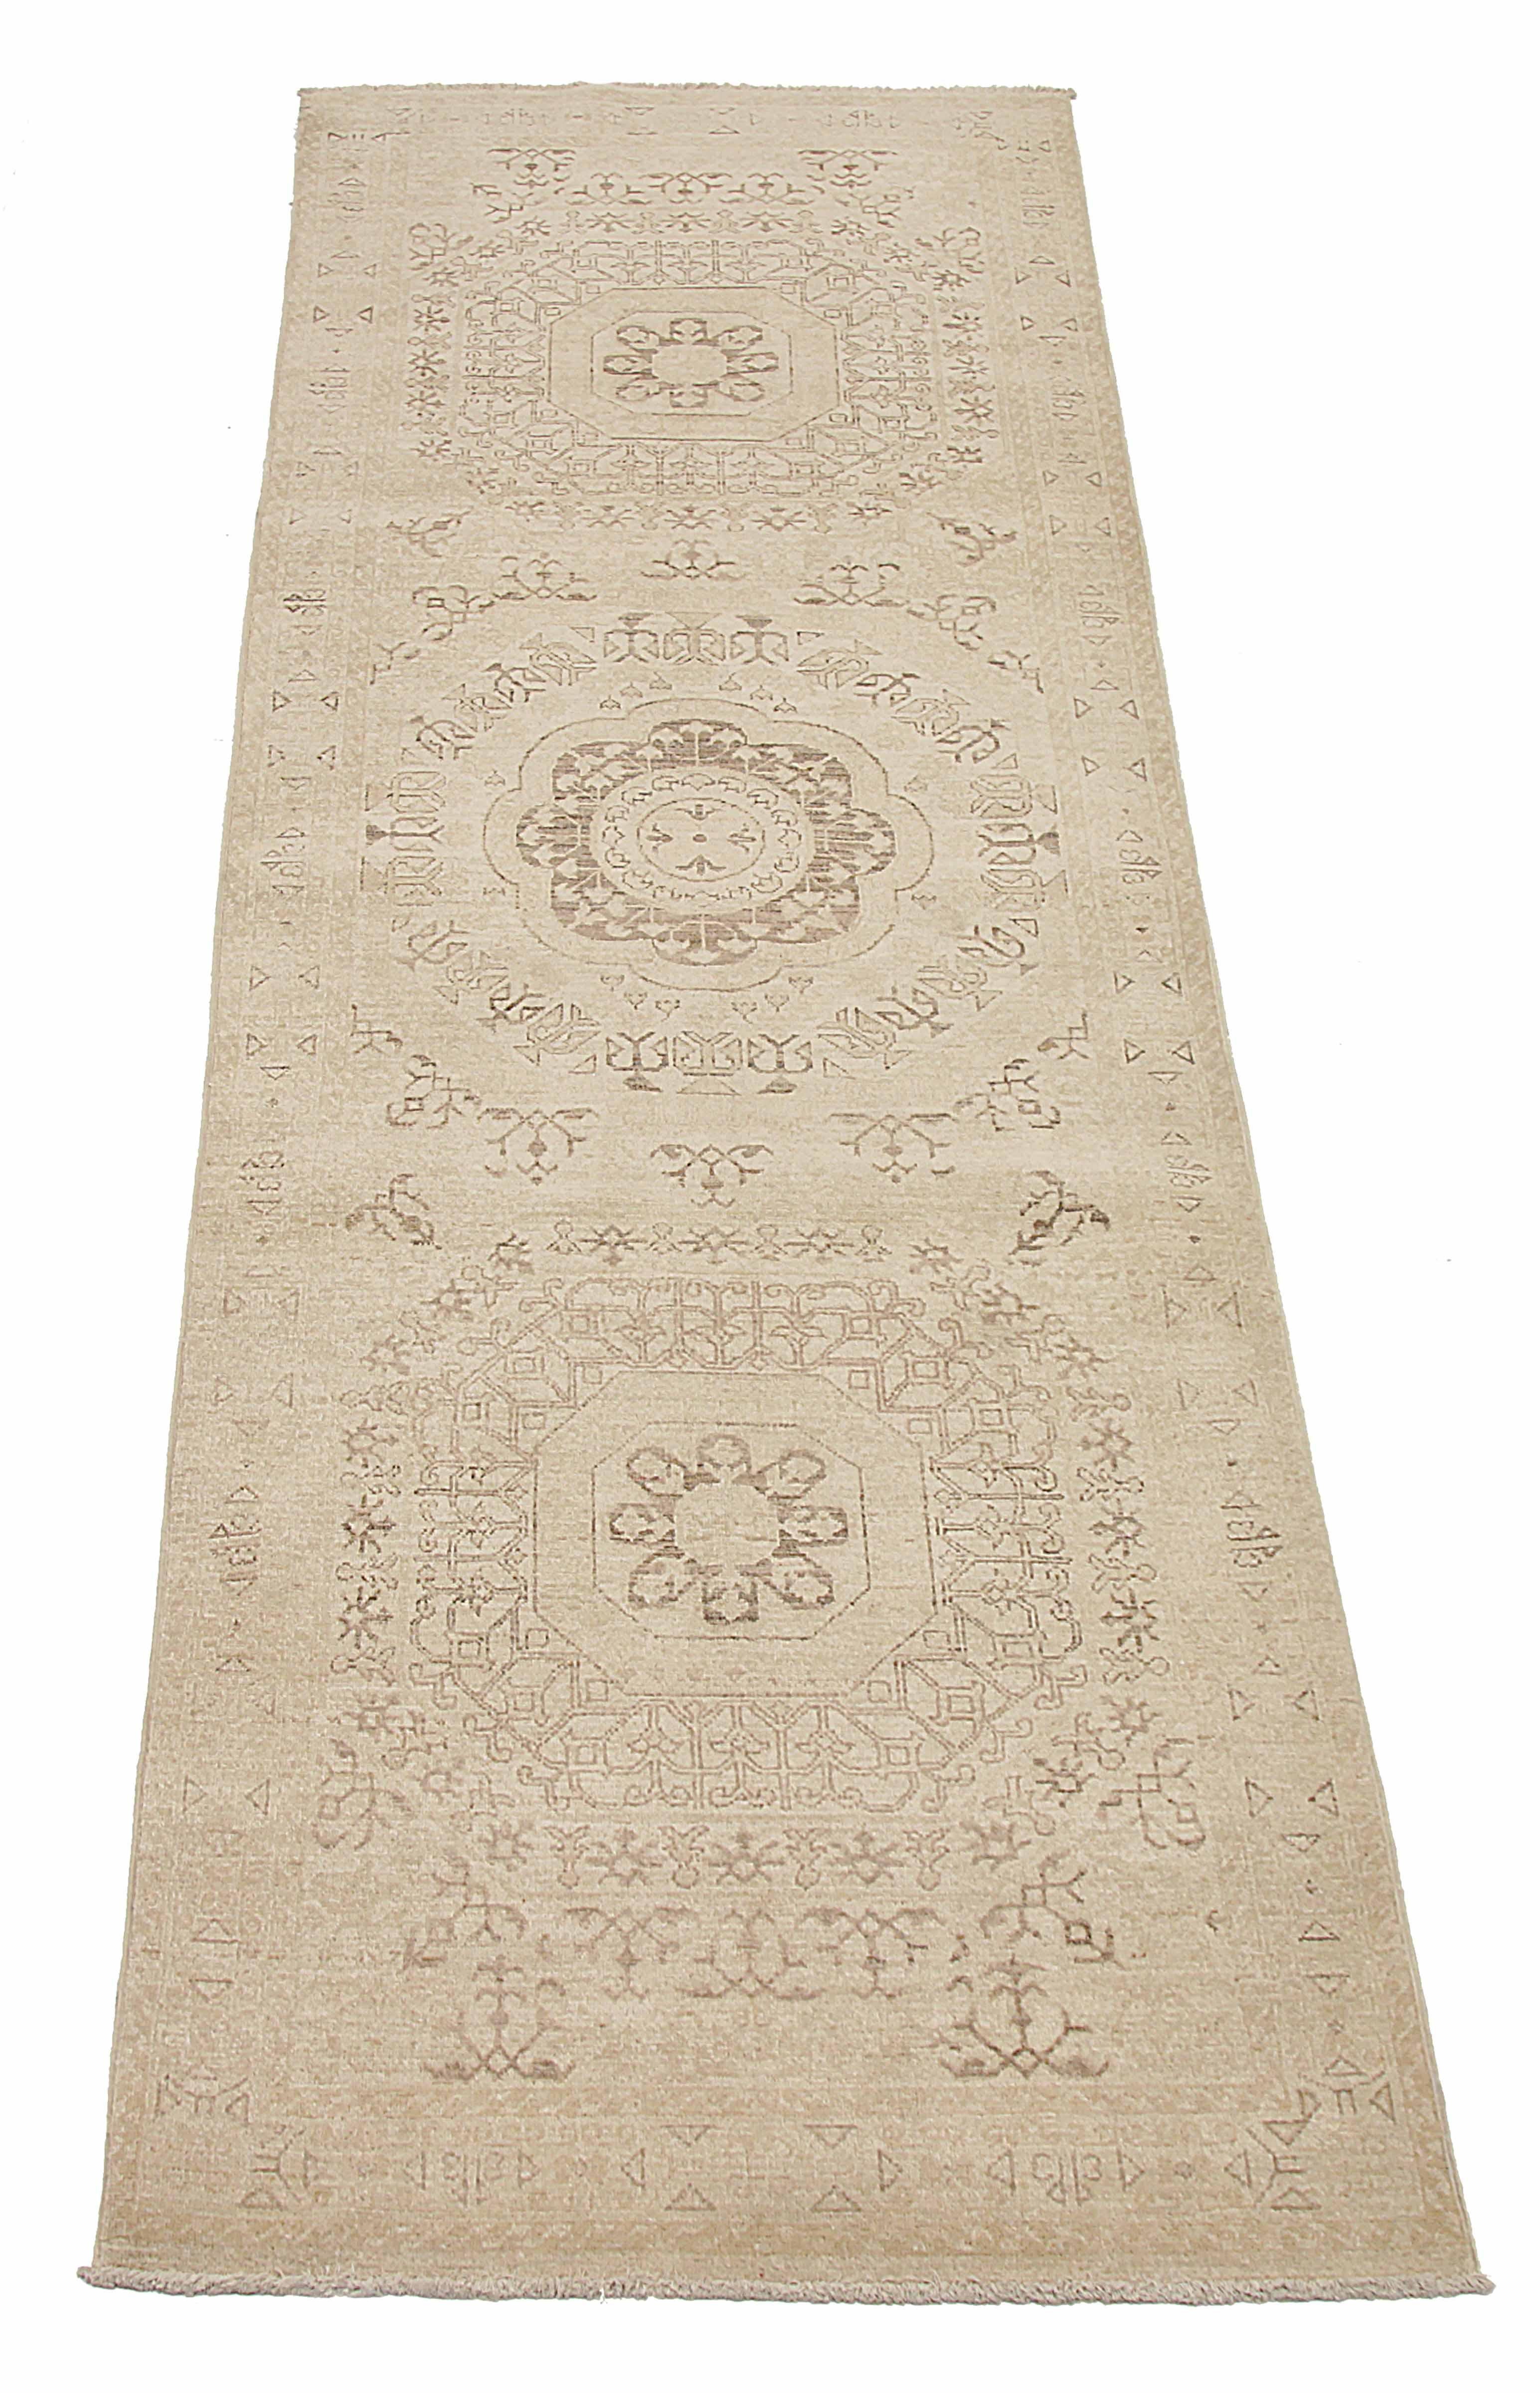 Runner rug handwoven from the finest sheep’s wool. It’s colored with all-natural vegetable dyes that are safe for humans and pets. It’s a traditional Tabriz design handwoven by expert artisans. It’s a lovely runner rug that can be incorporated with